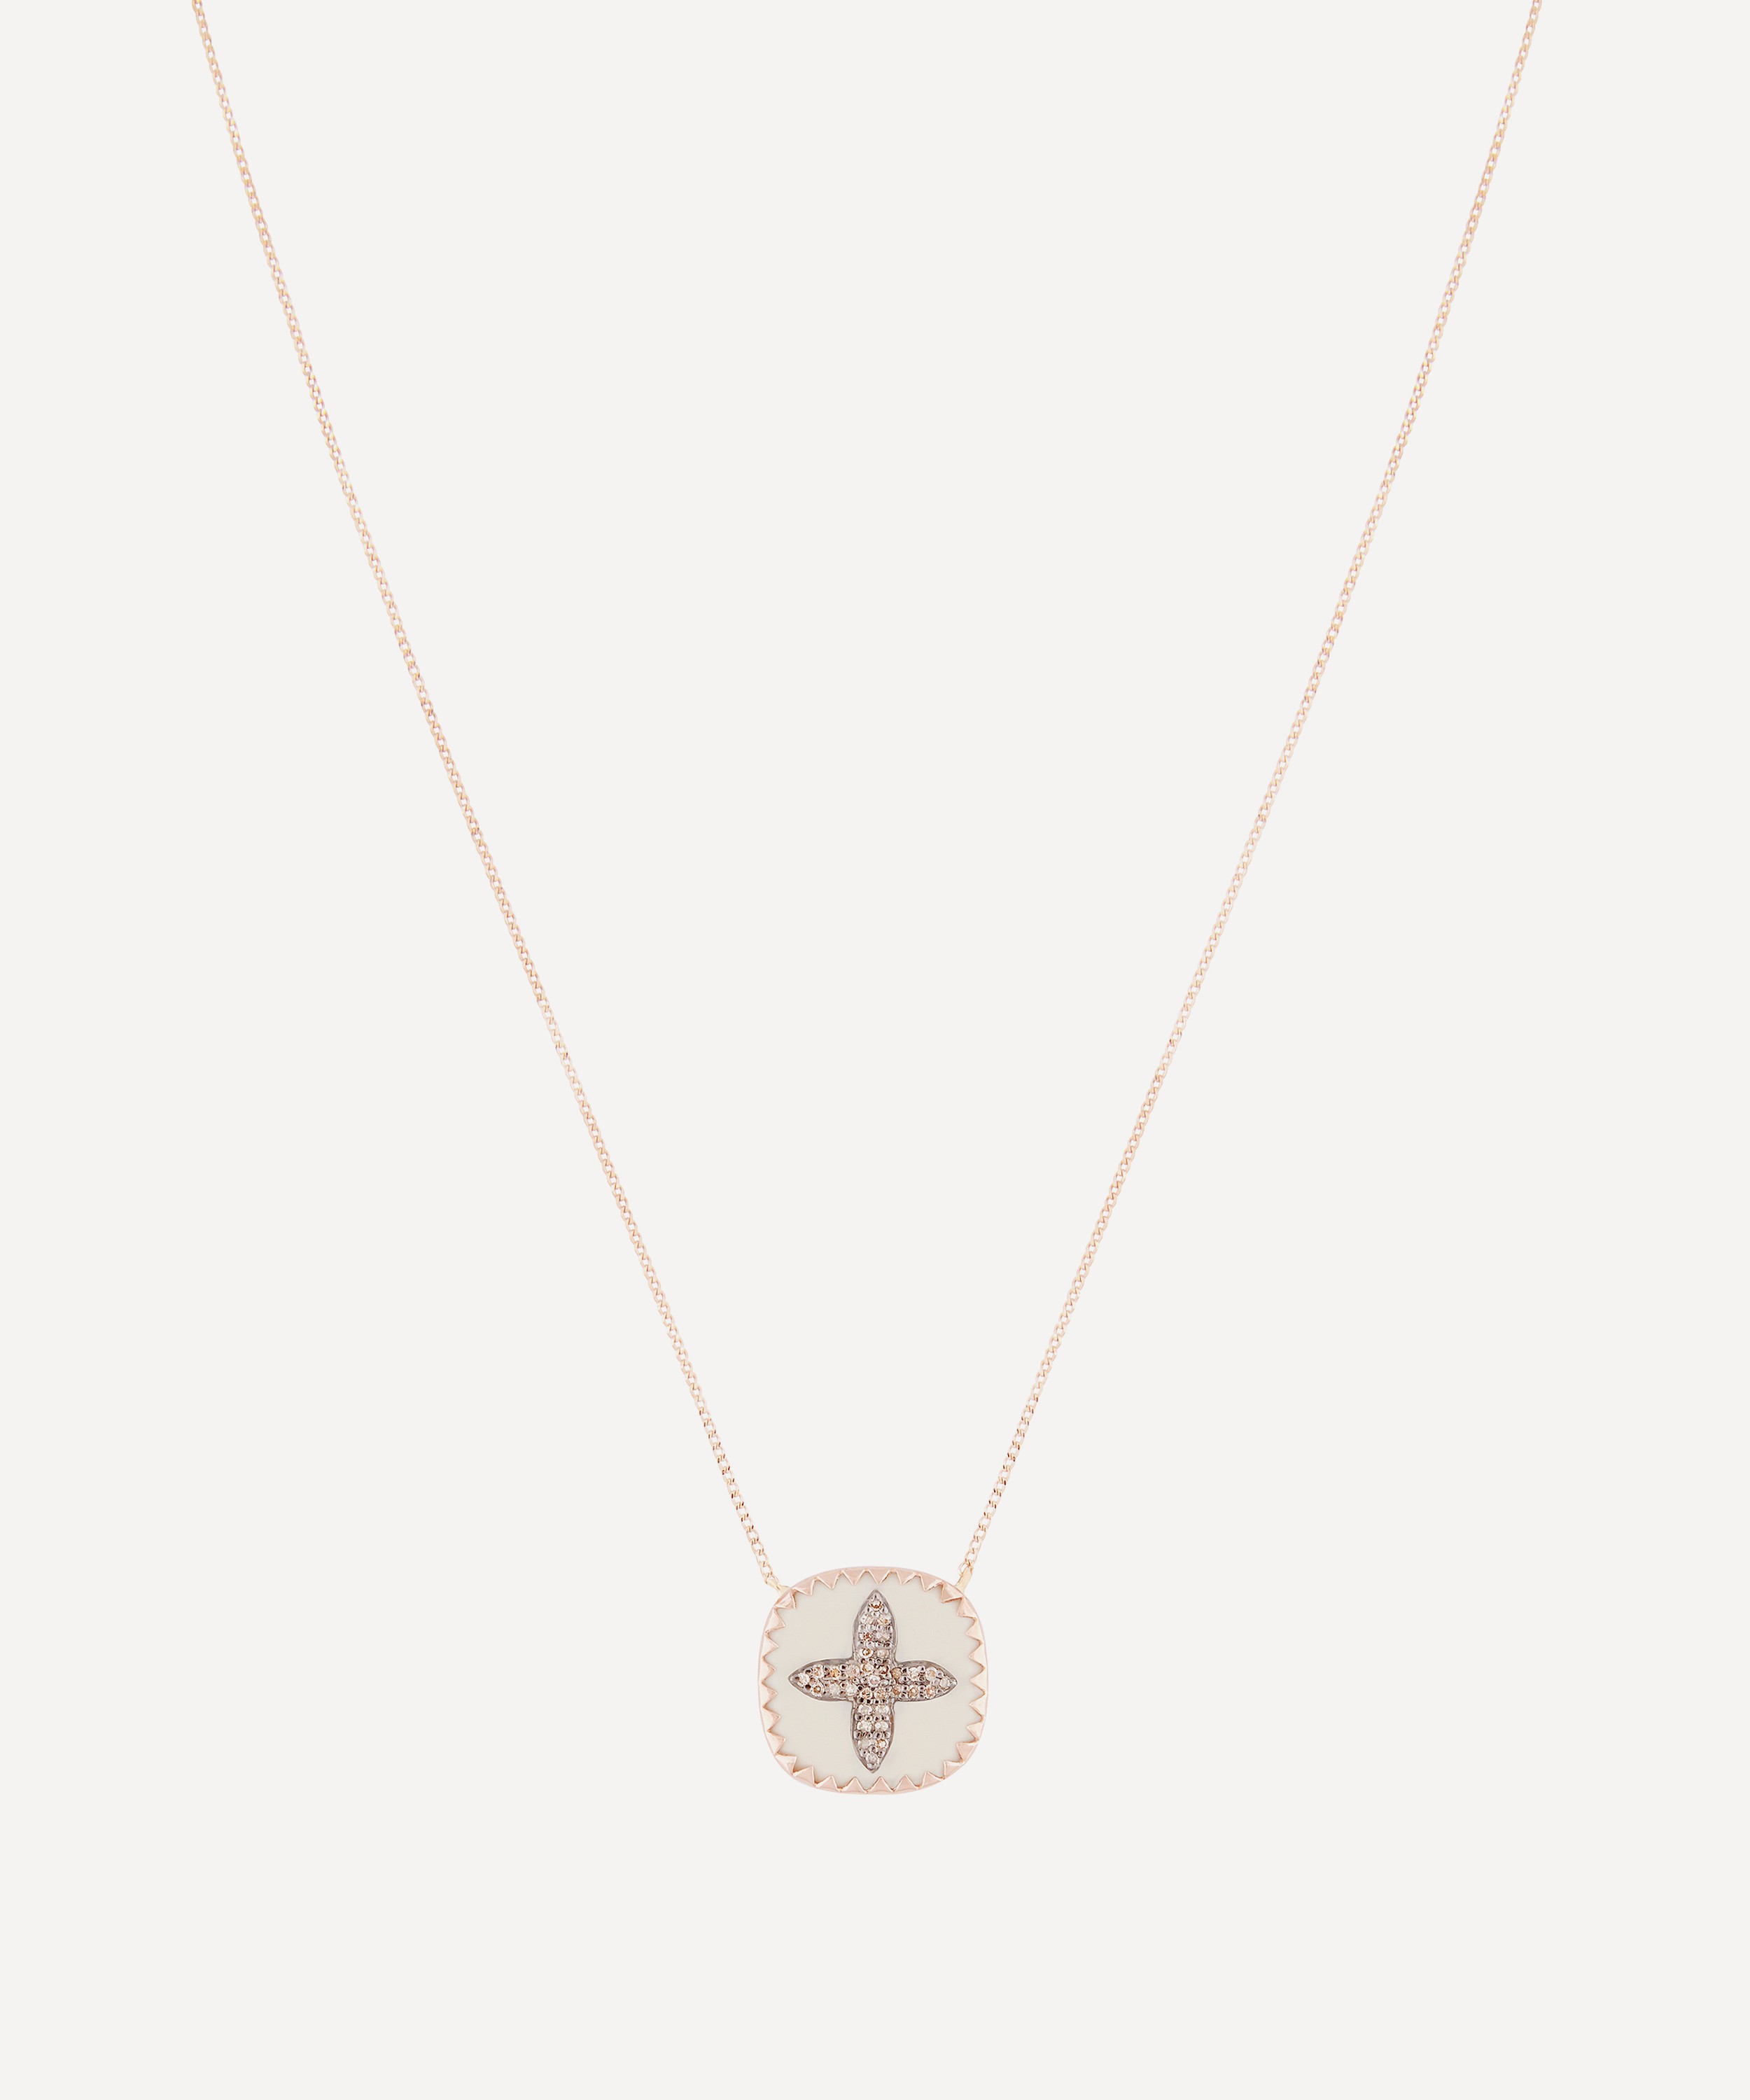 Pascale Monvoisin - 9ct Rose Gold Bowie Diamond and Bakelite Pendant Necklace image number 0